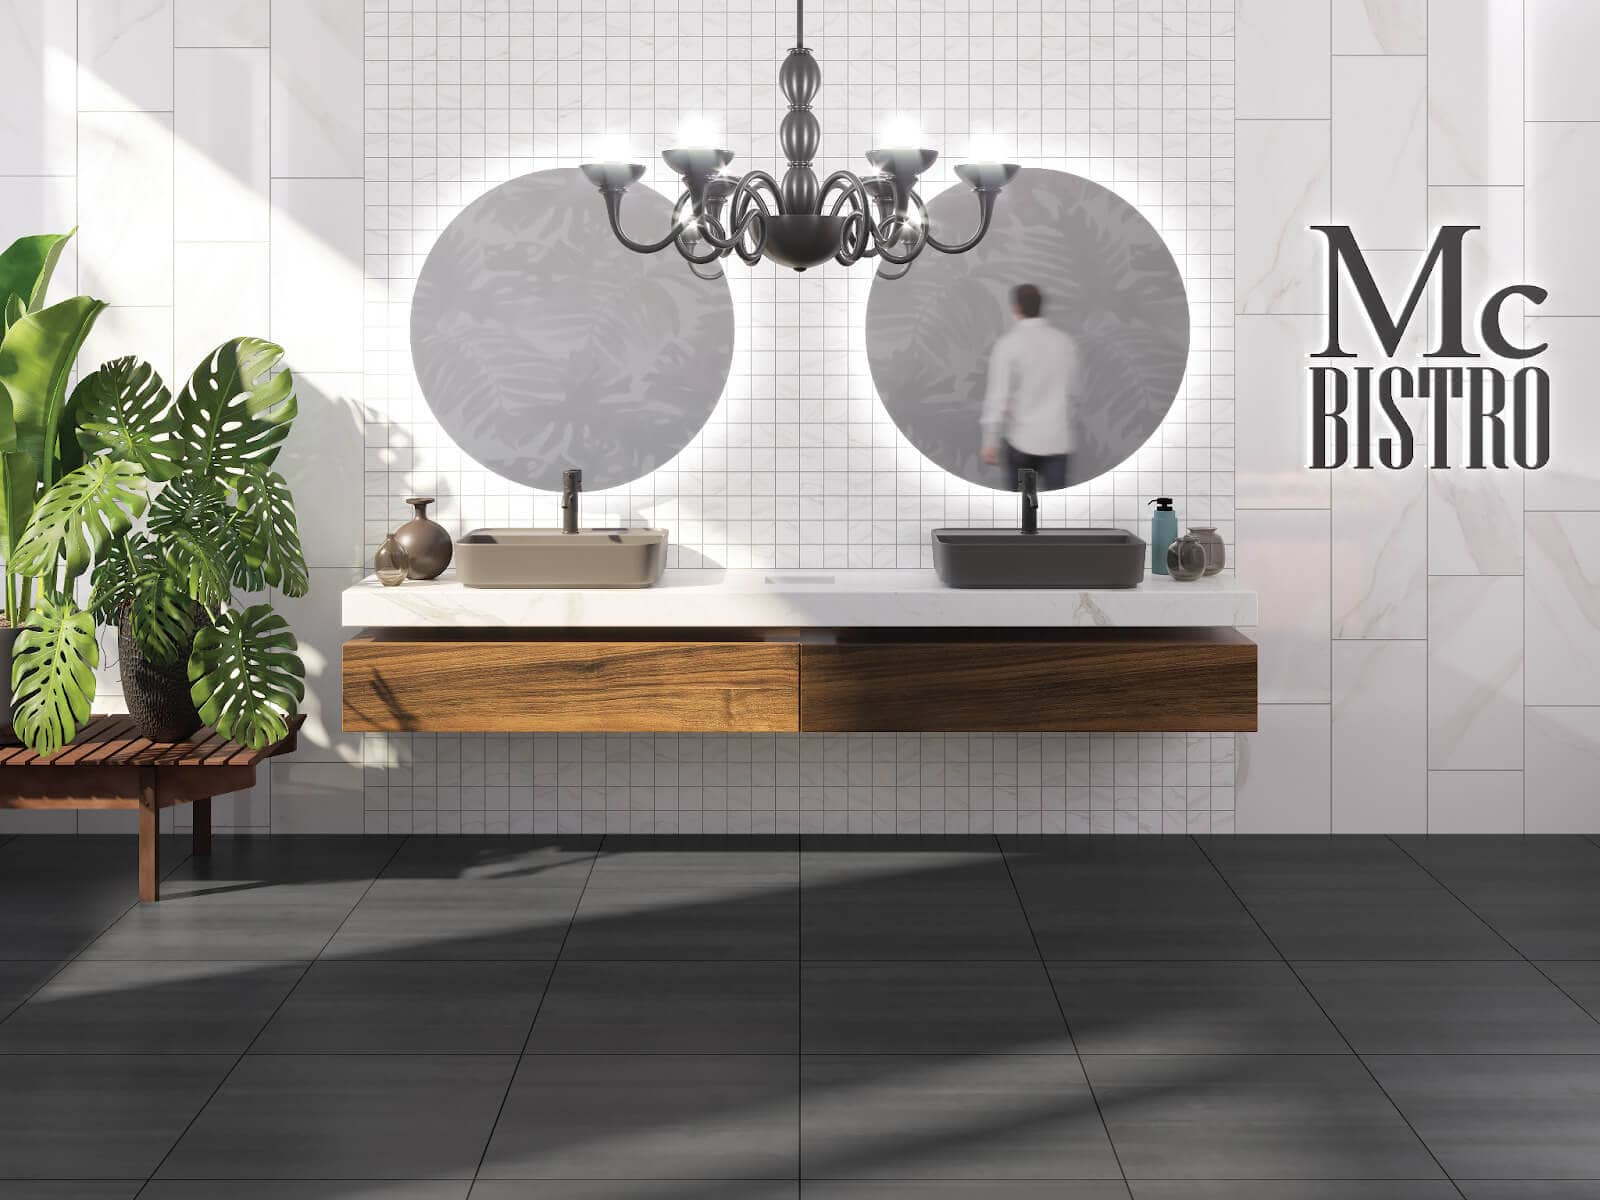 Business bathroom sink with Mini tile grid in a marble look

